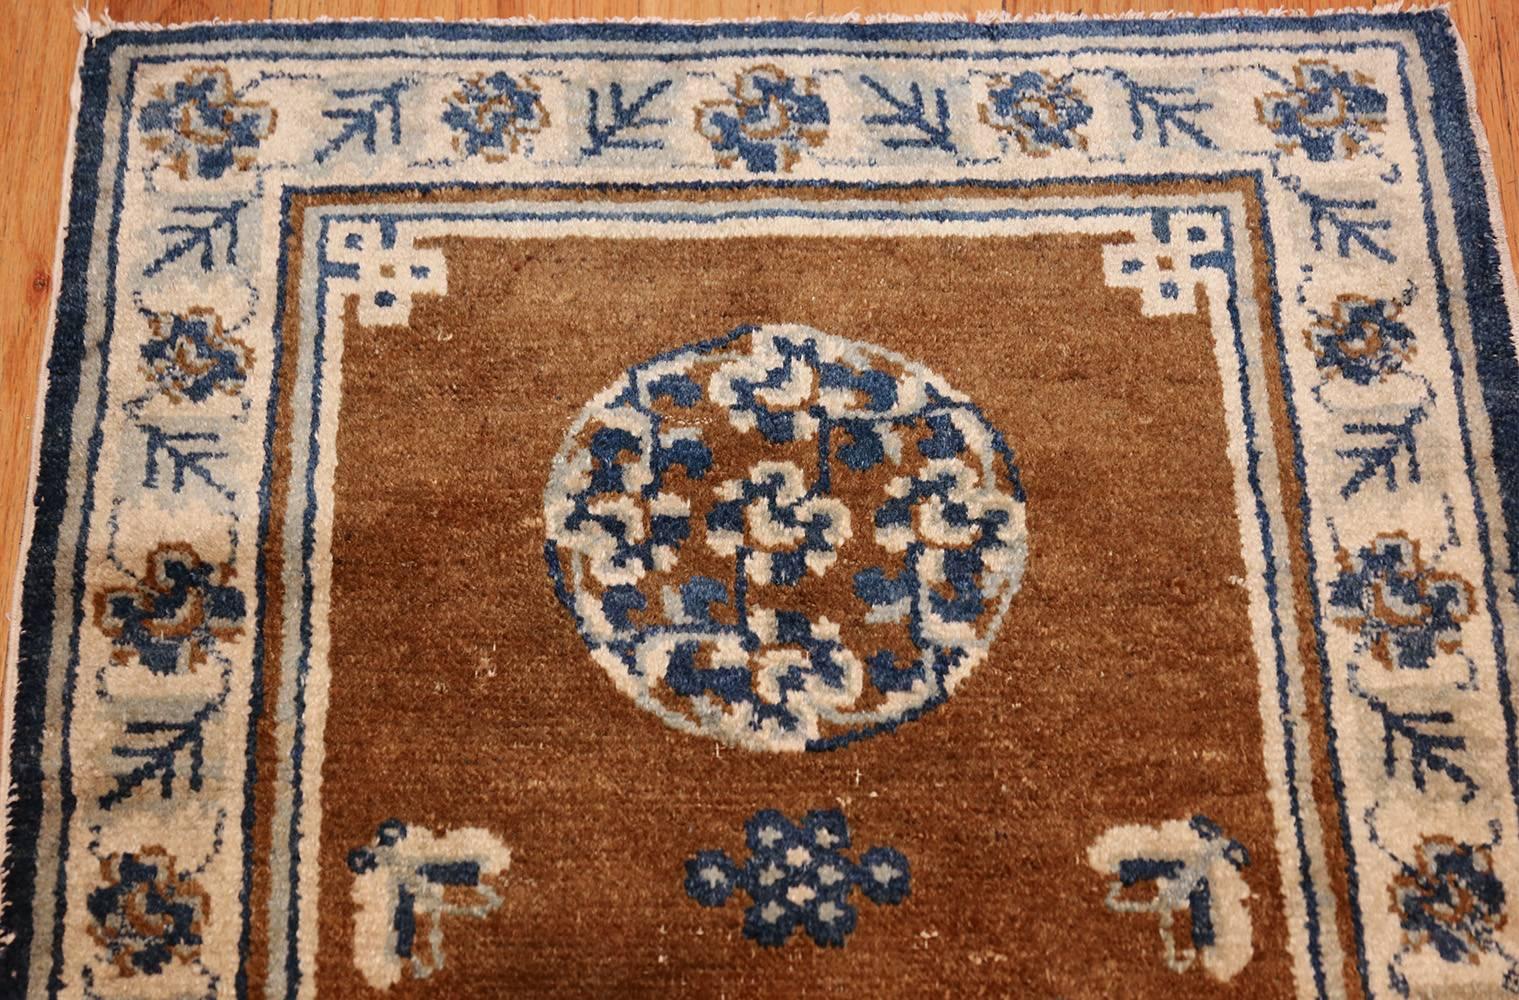 20th Century Small Size Antique Blue and Brown Chinese Rug